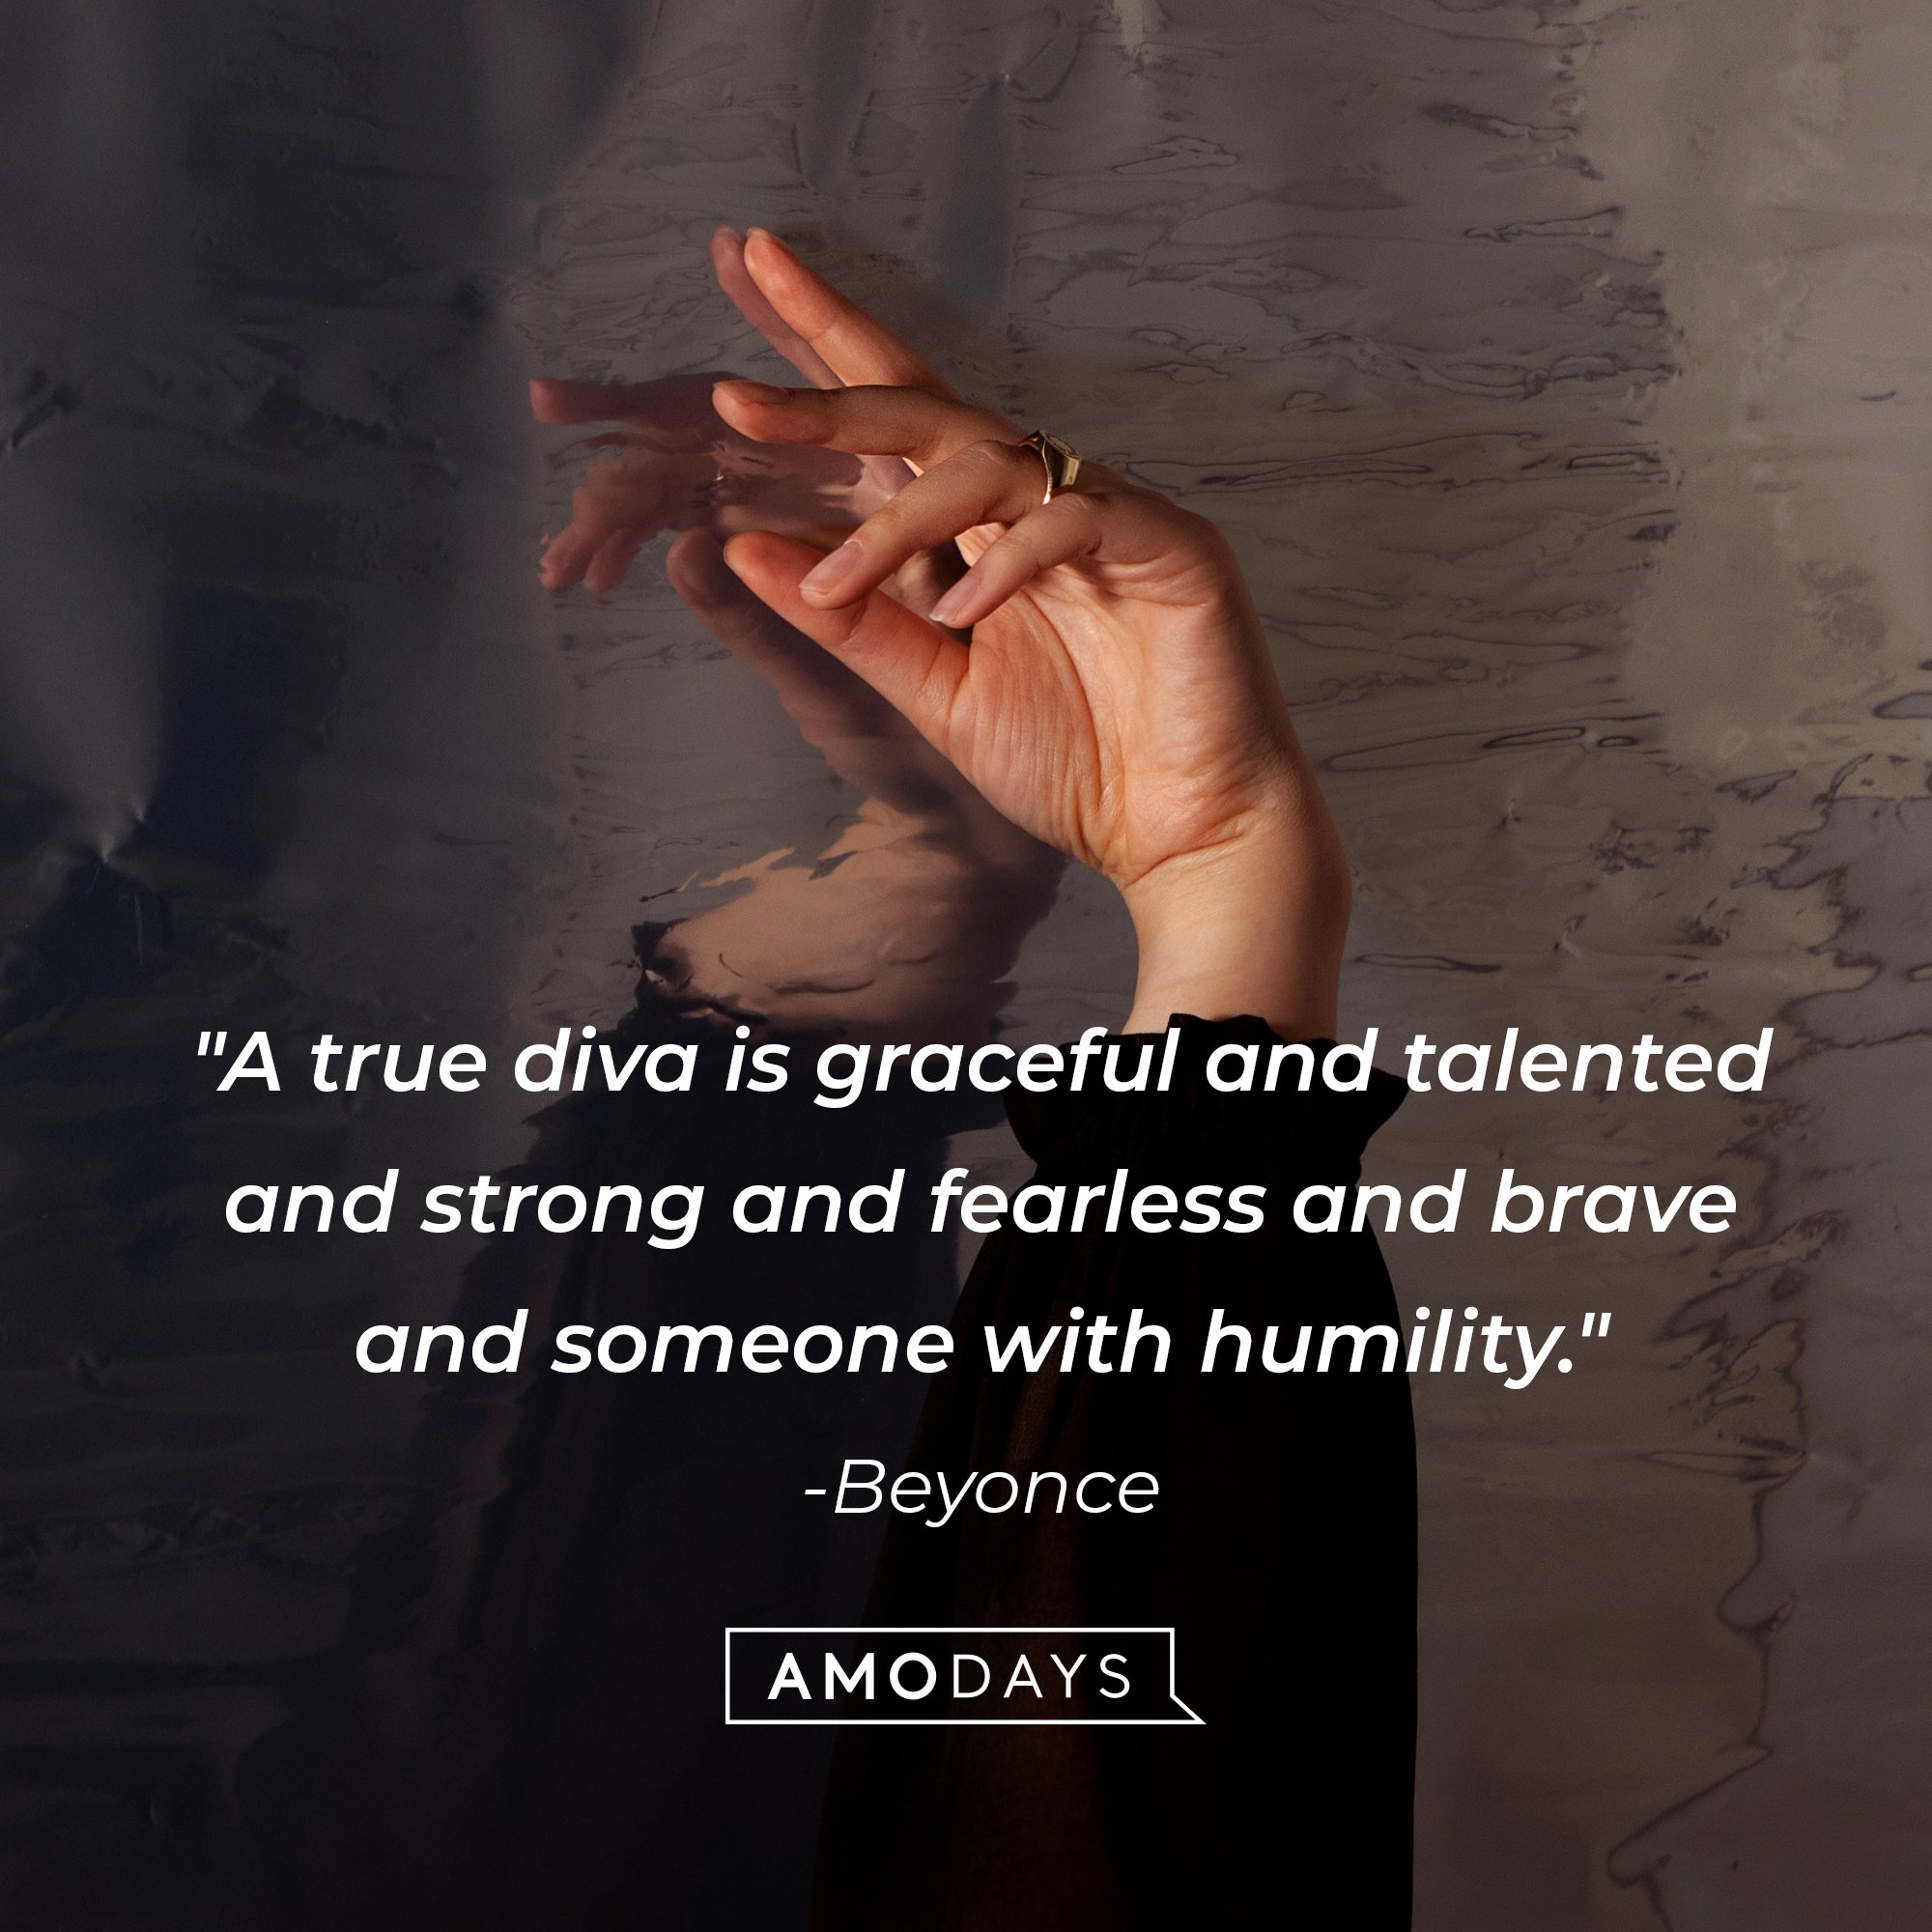 Beyoncé’s quote: "A true diva is graceful and talented and strong and fearless and brave and someone with humility." | Image: AmoDays